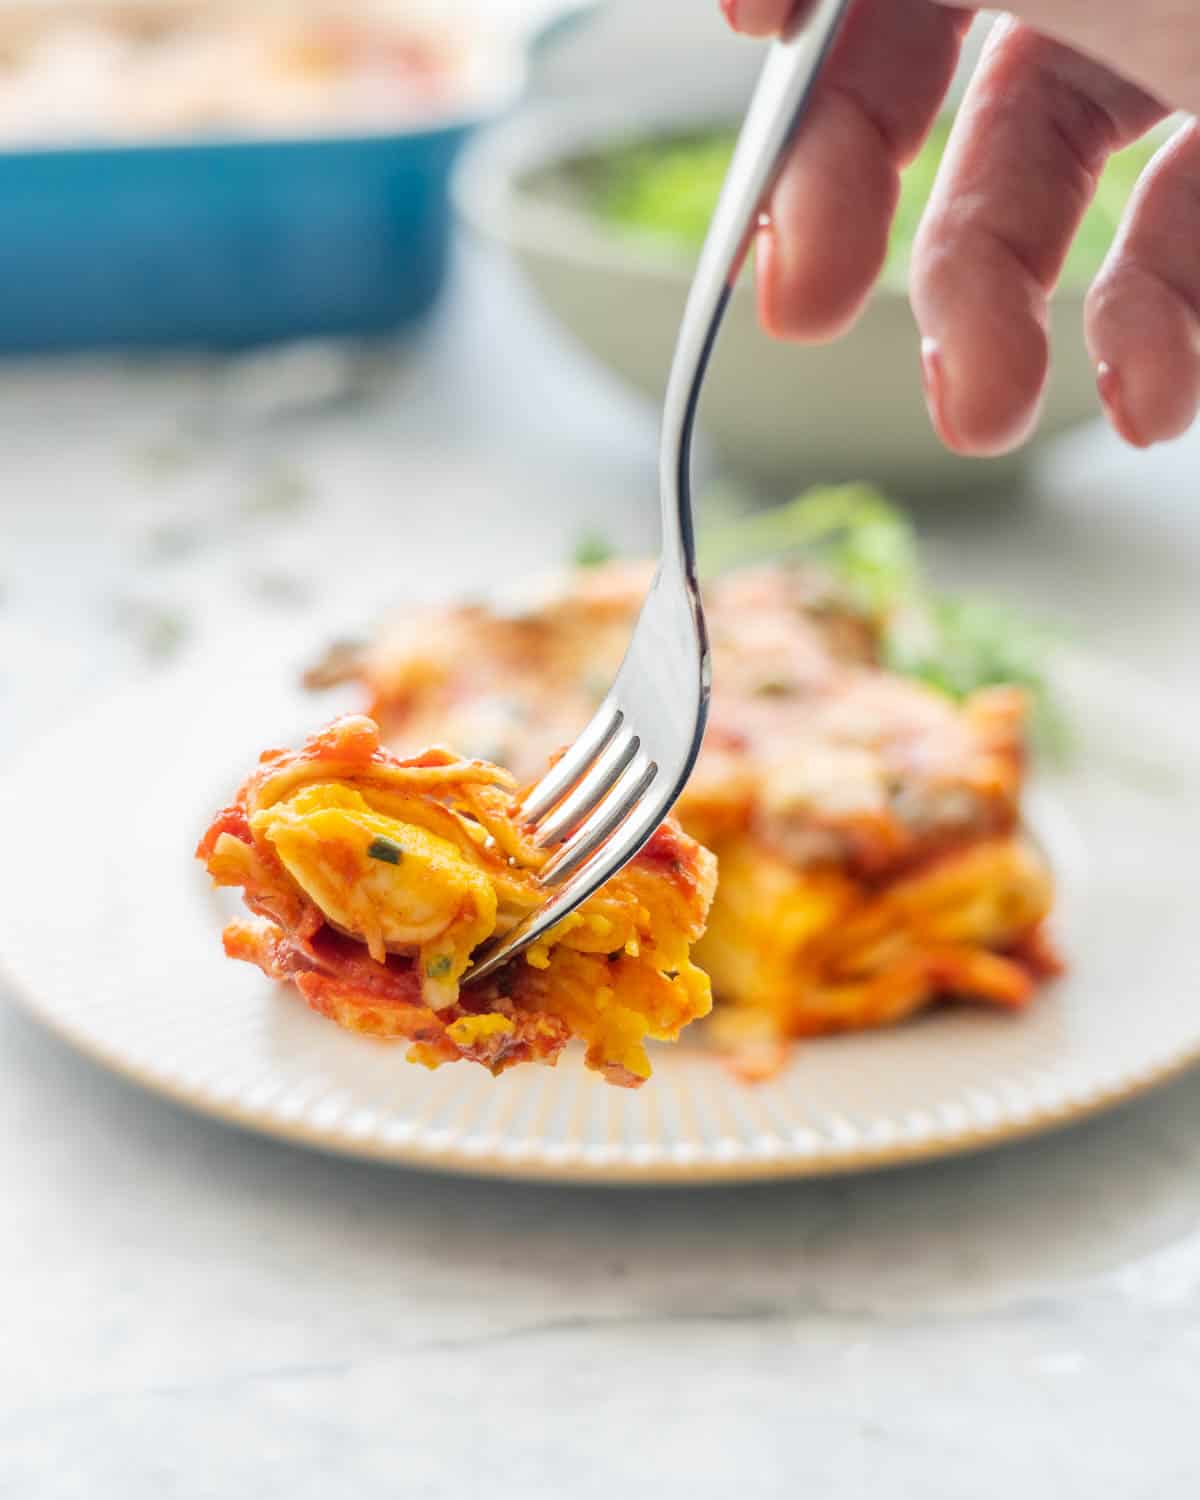 A serving of Butternut Squash Pasta and a side salad on a plate with forkful held above it.  